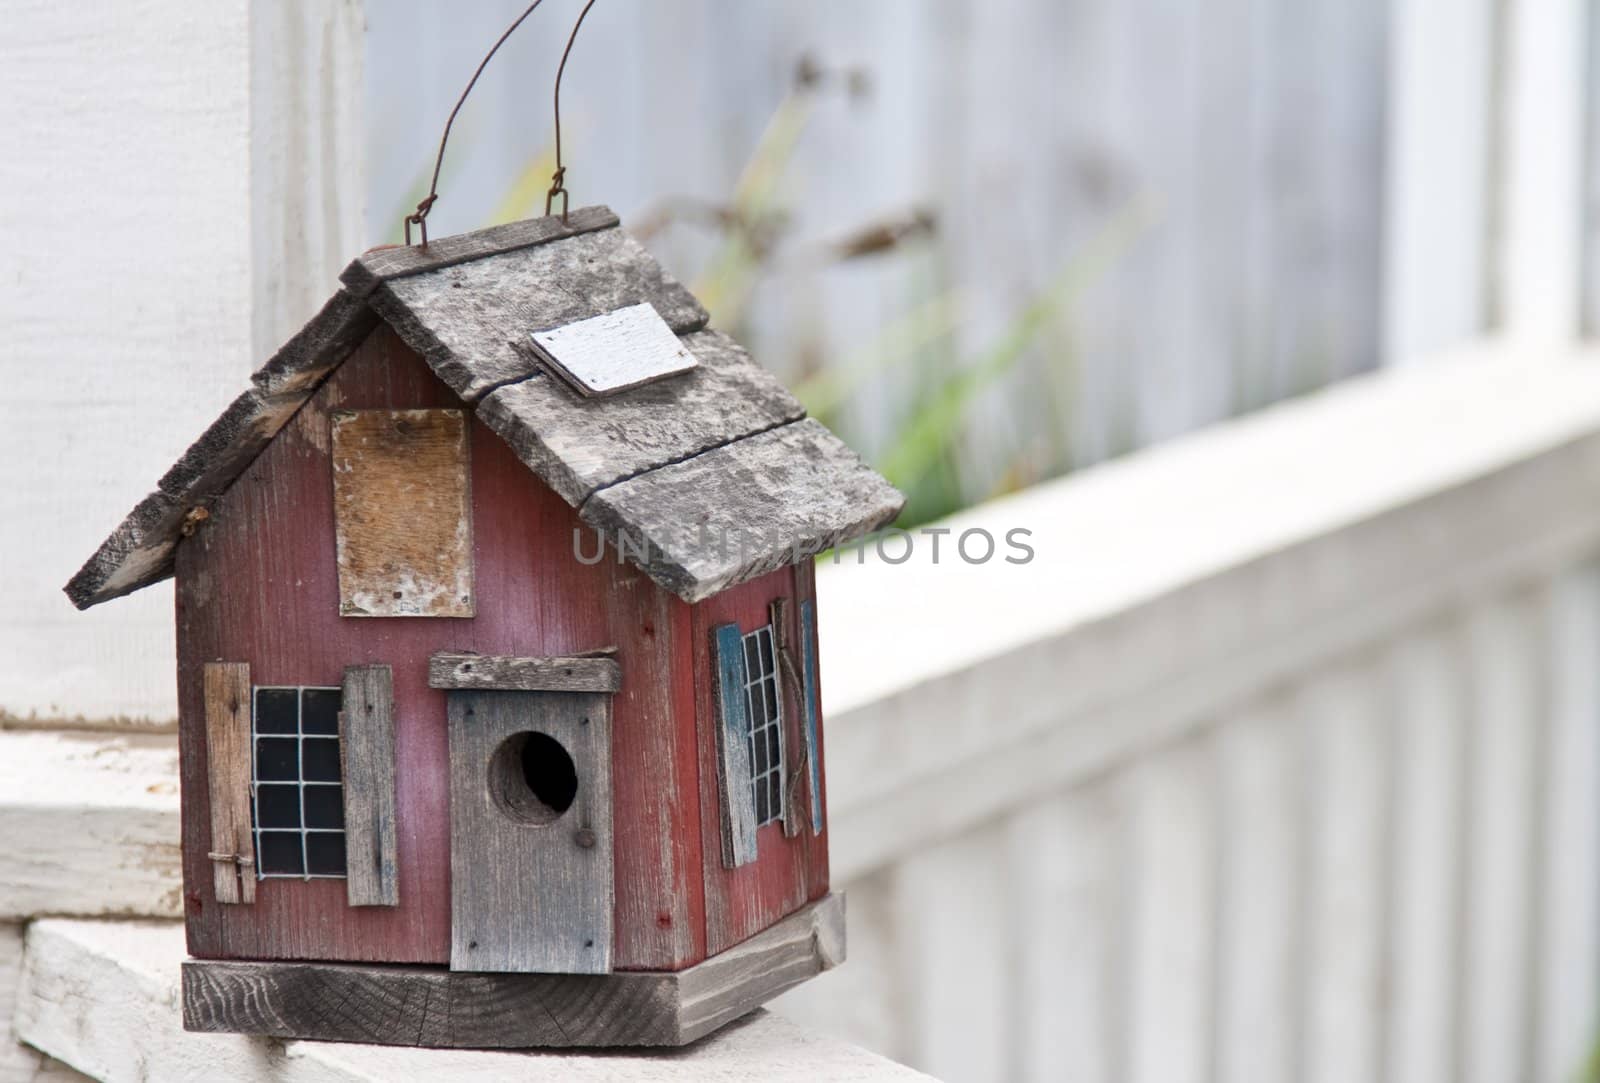 Birdhouse by timscottrom